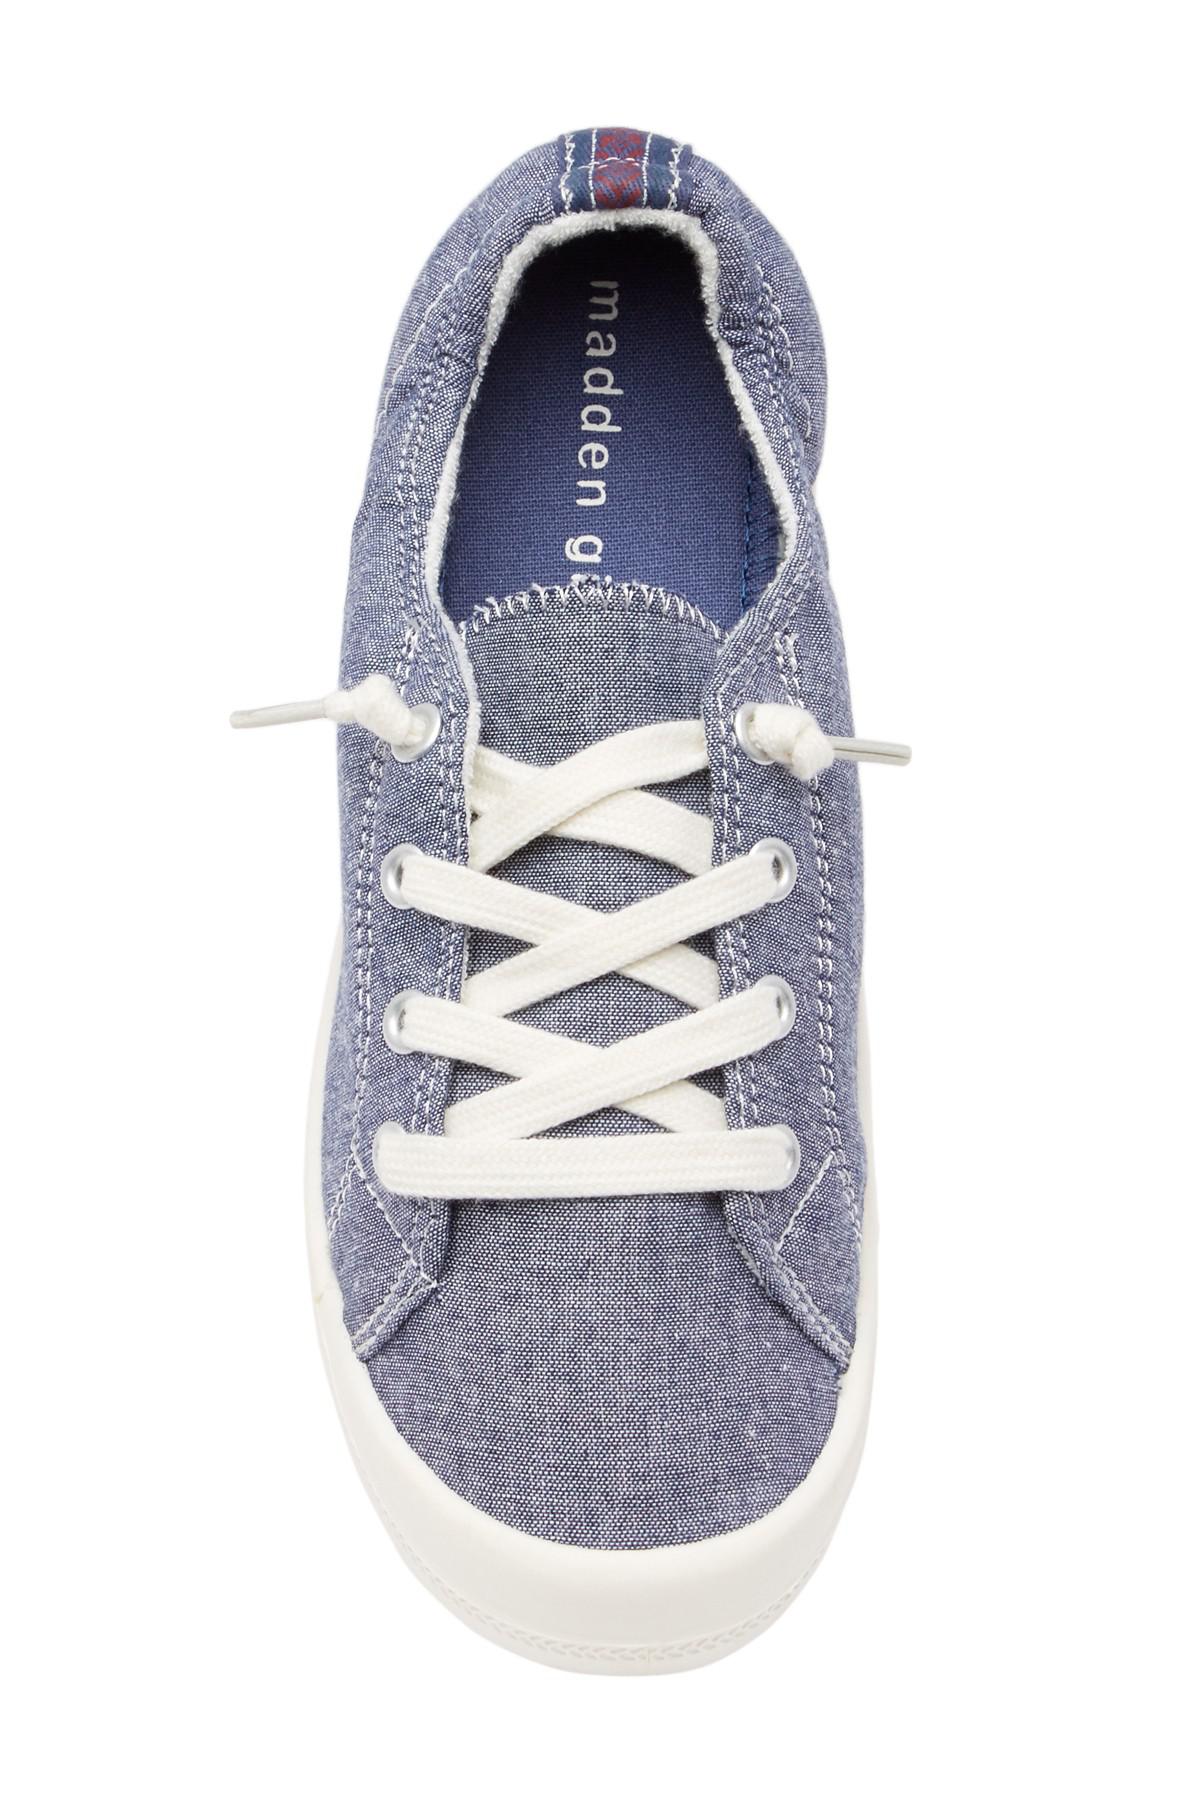 madden girl sneakers barby